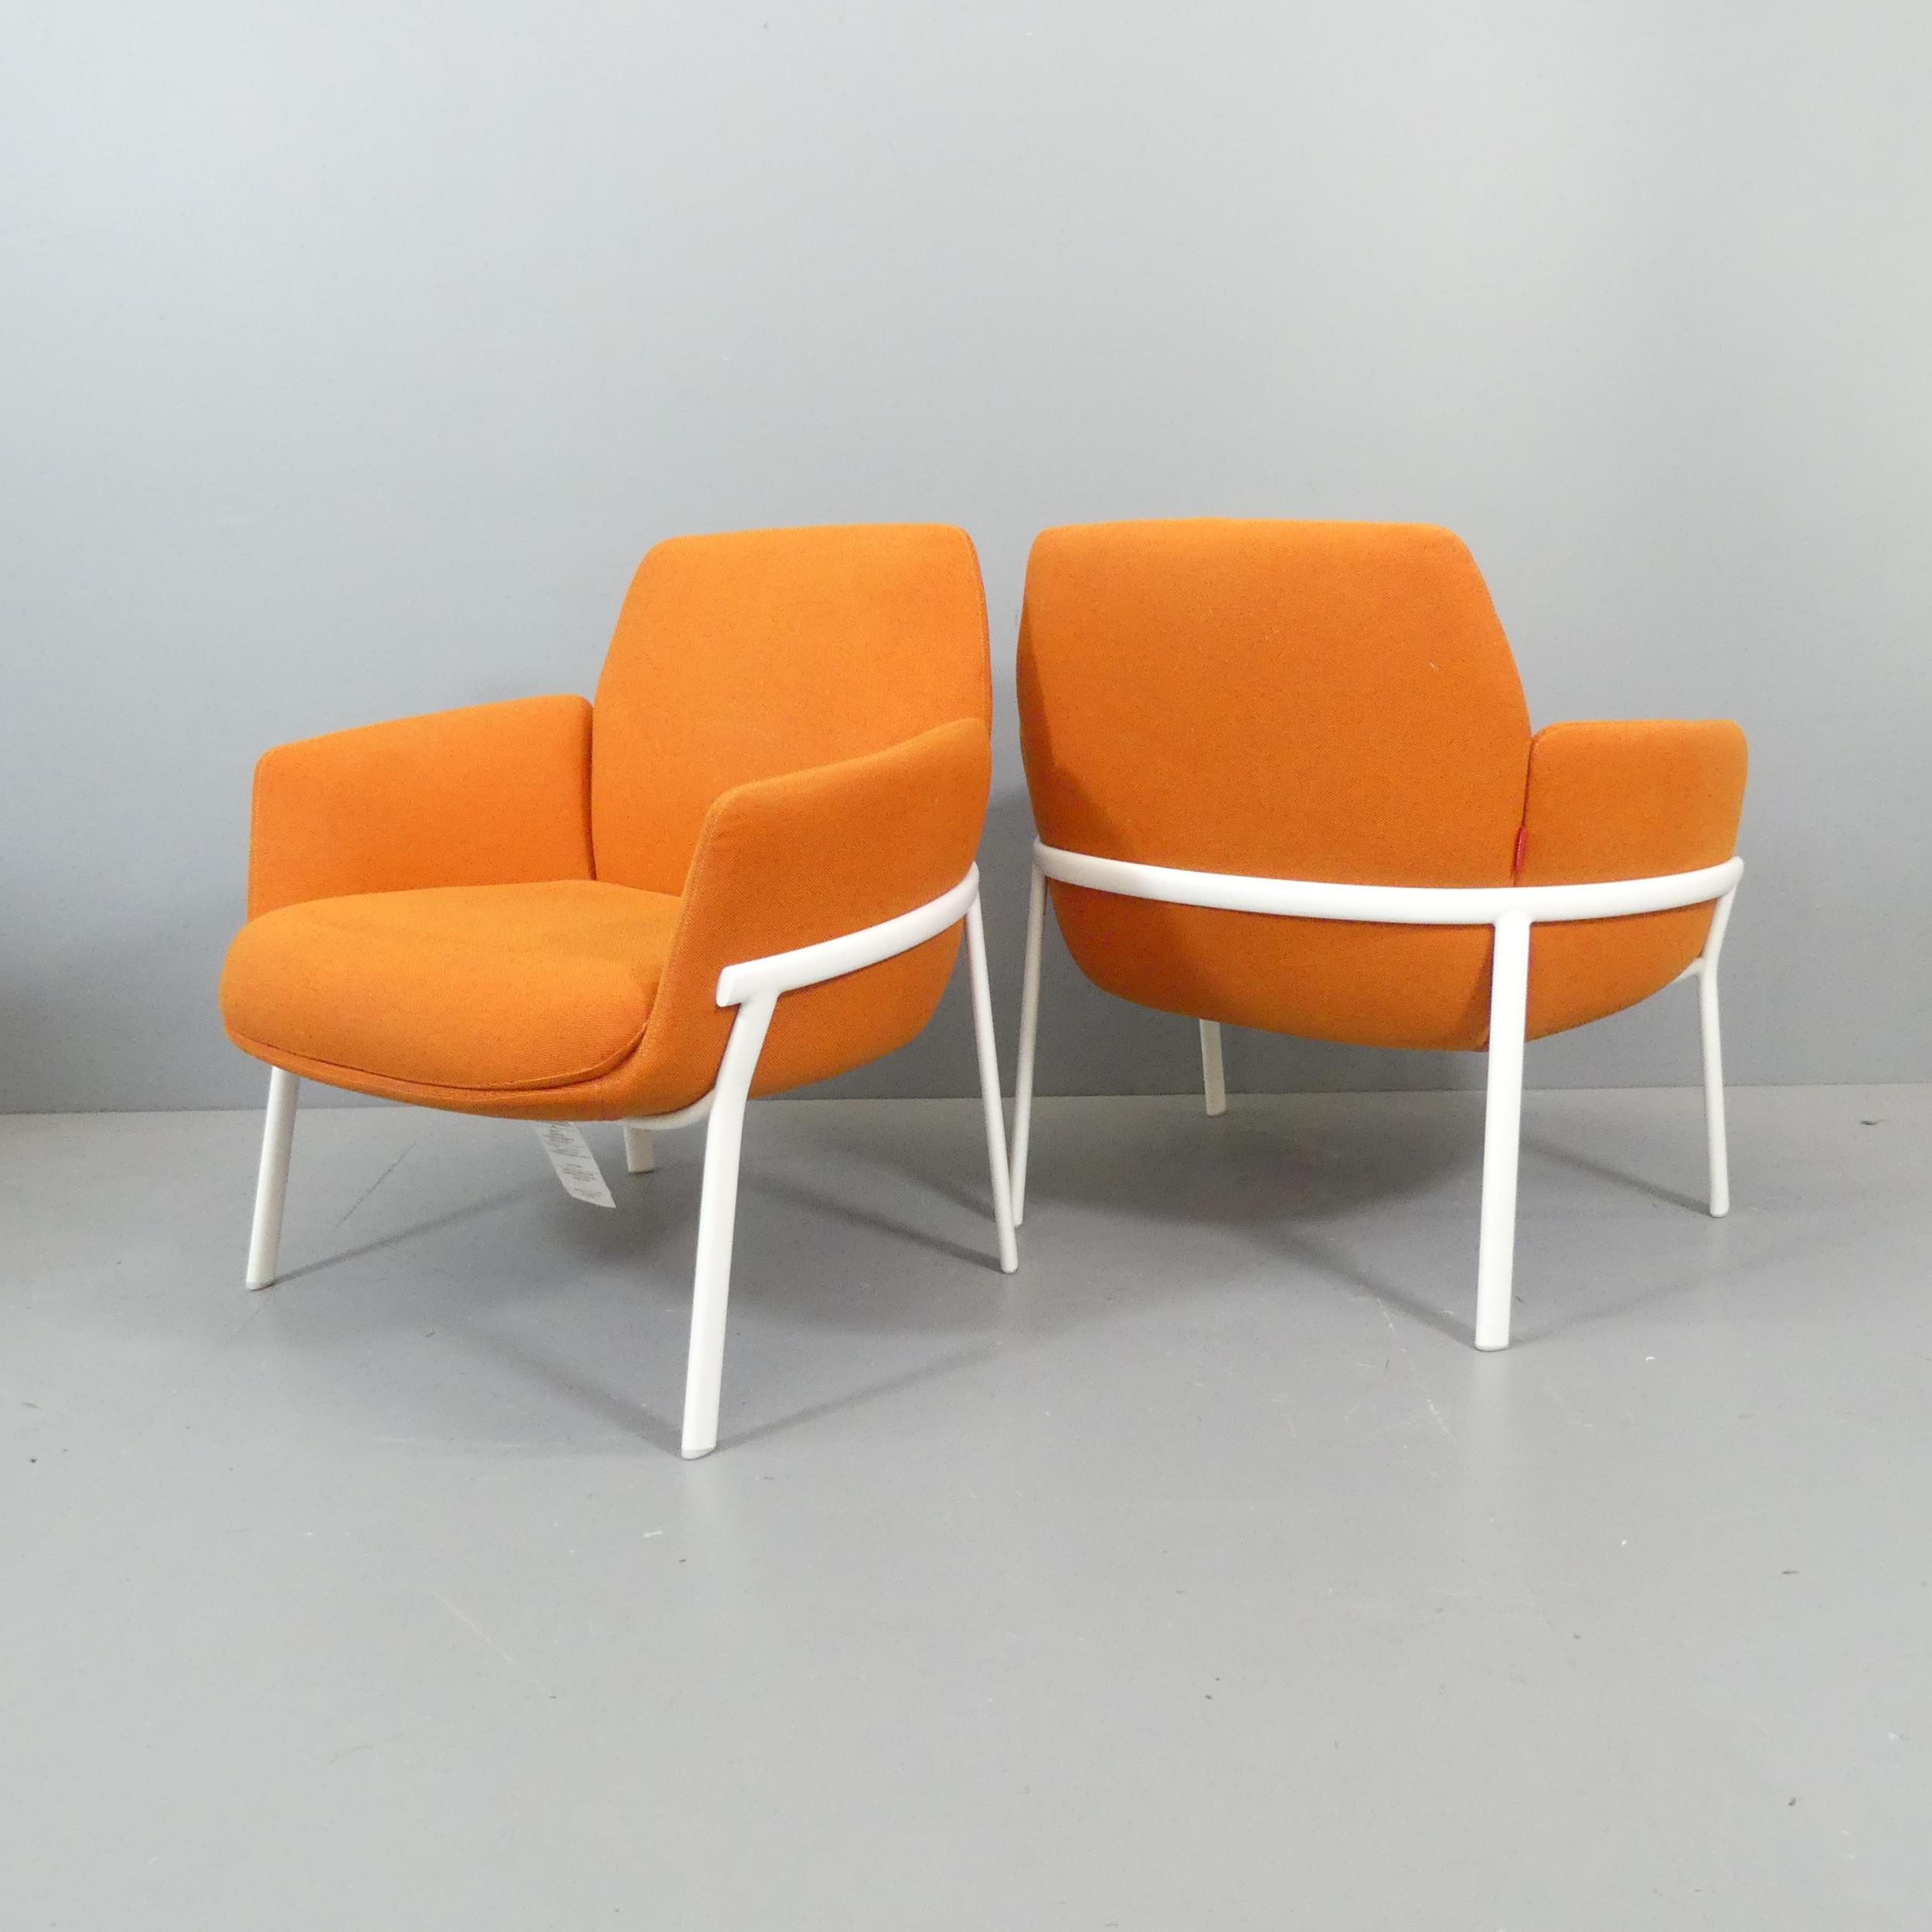 HAWORTH - A pair of contemporary Poppy armchairs by Patricia Urquiola, with maker’s label, current - Image 2 of 2